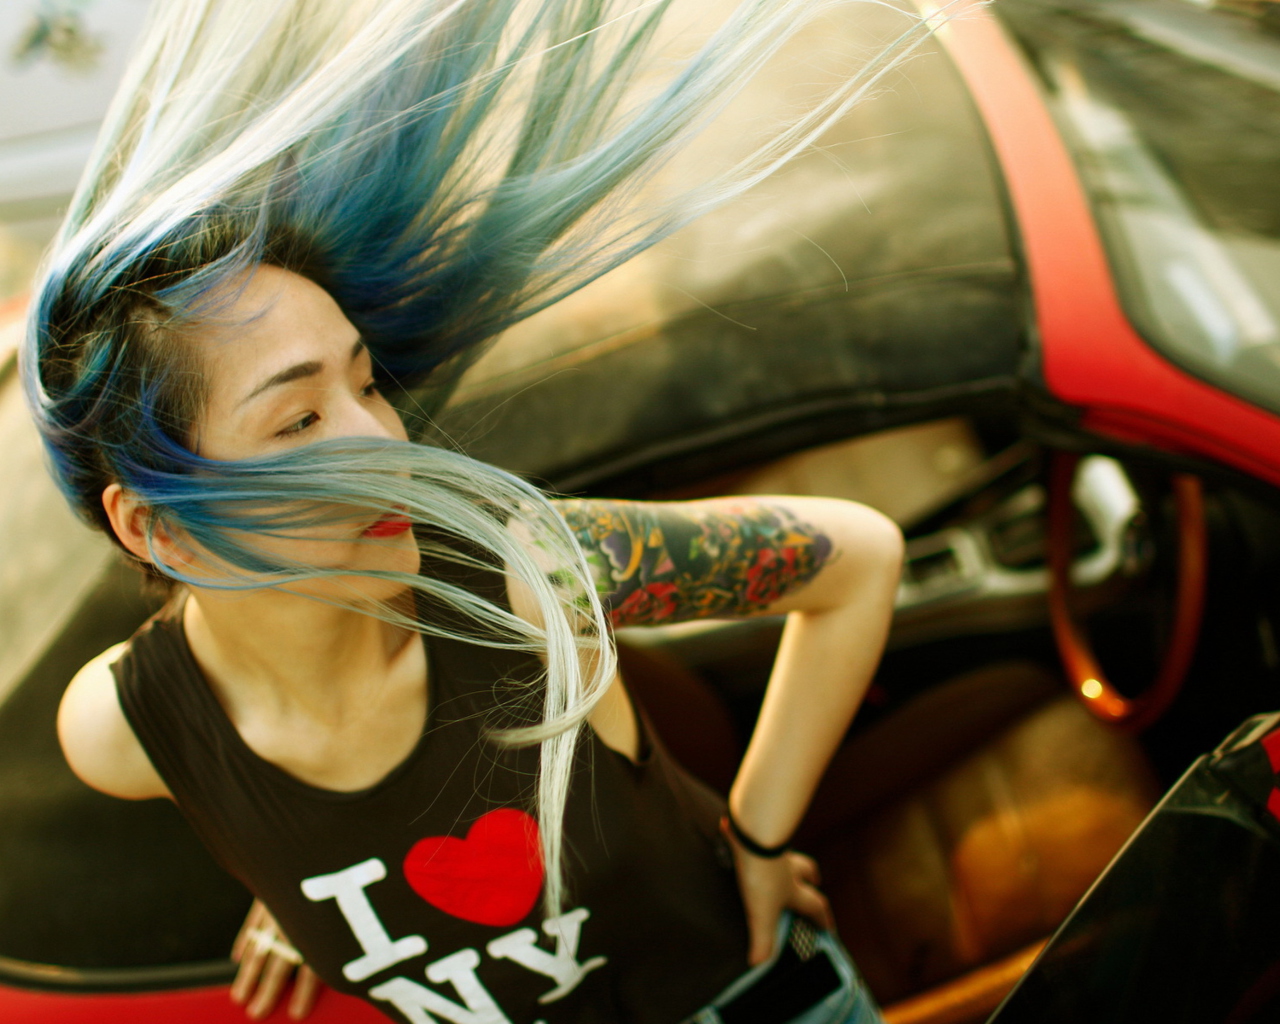 Das Cool Asian Girl With Blue Hair & I Love NY T-shirt Wallpaper 1280x1024